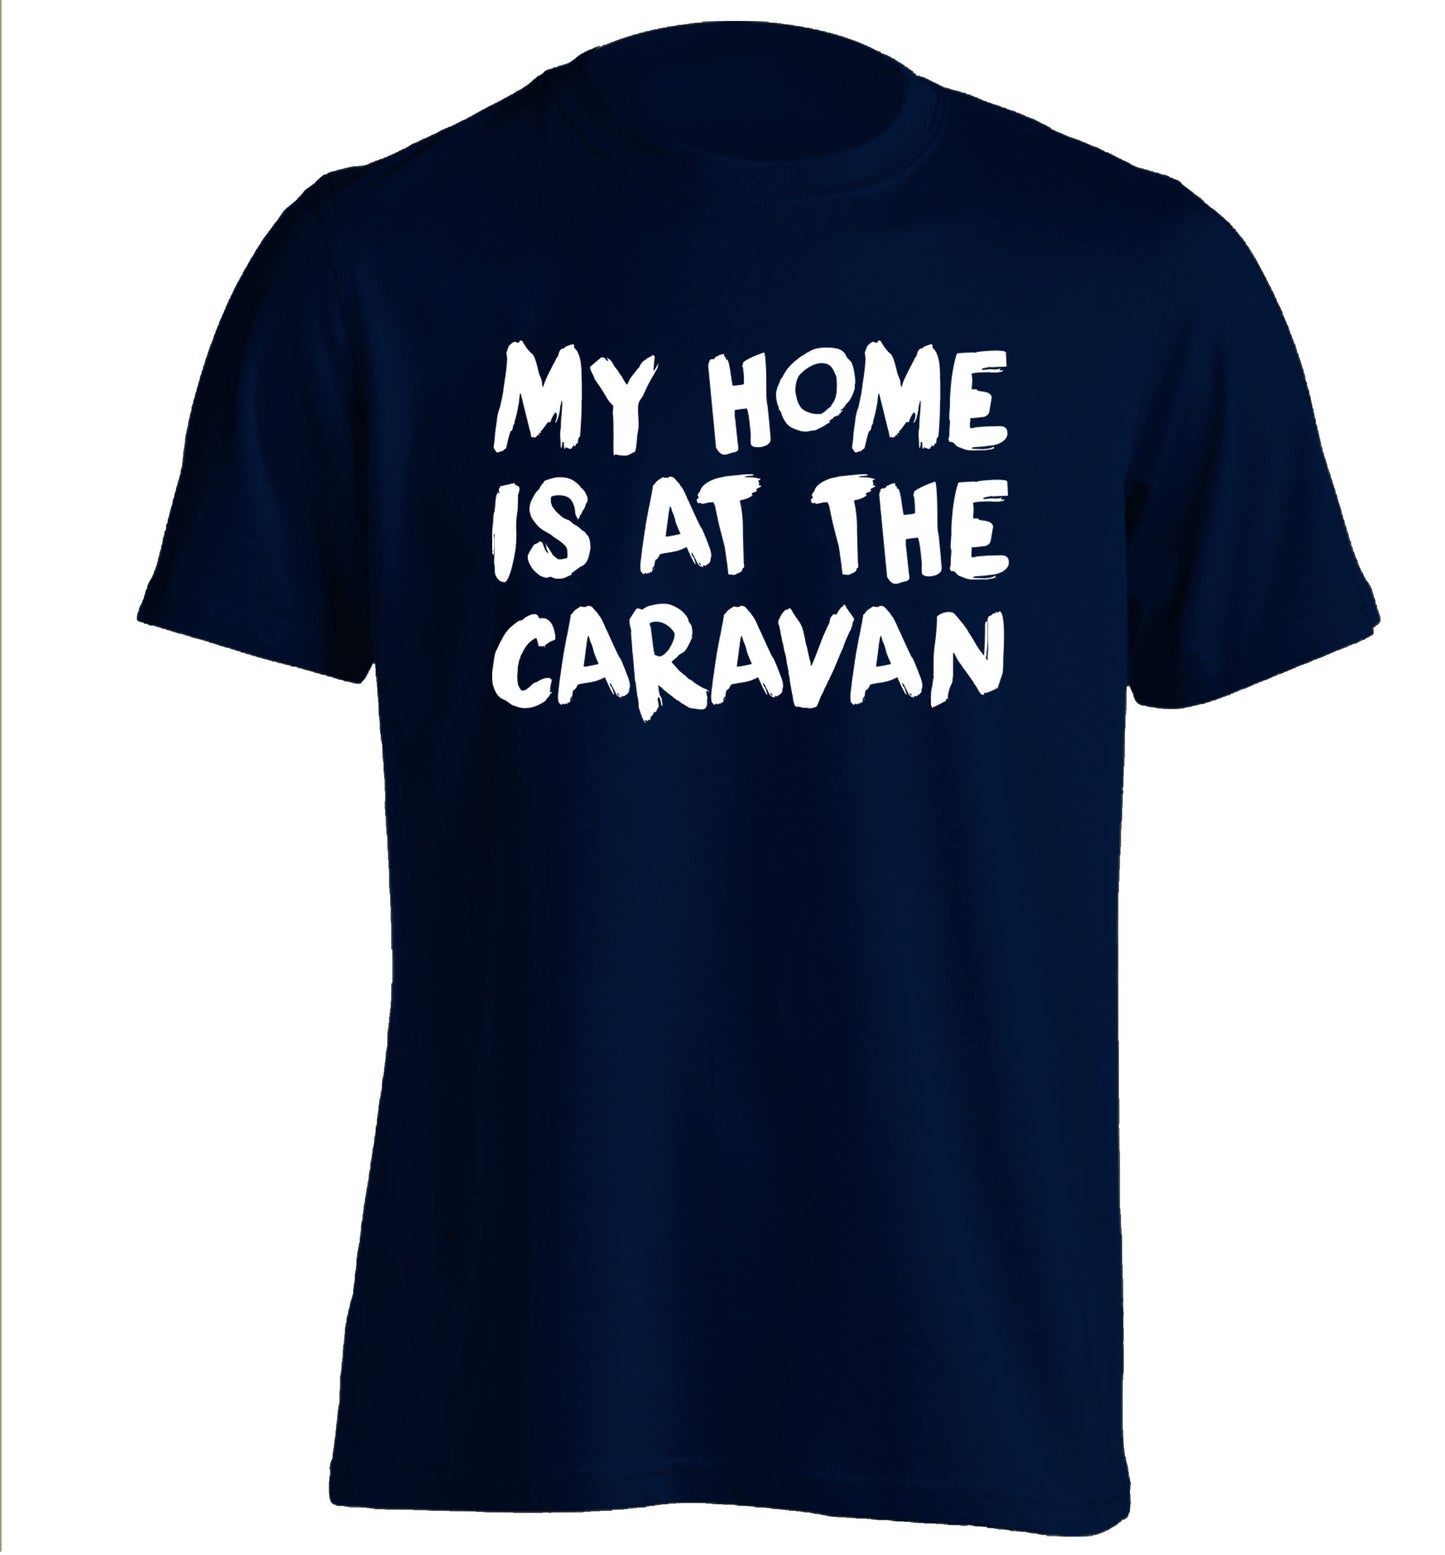 My home is at the caravan adults unisex navy Tshirt 2XL